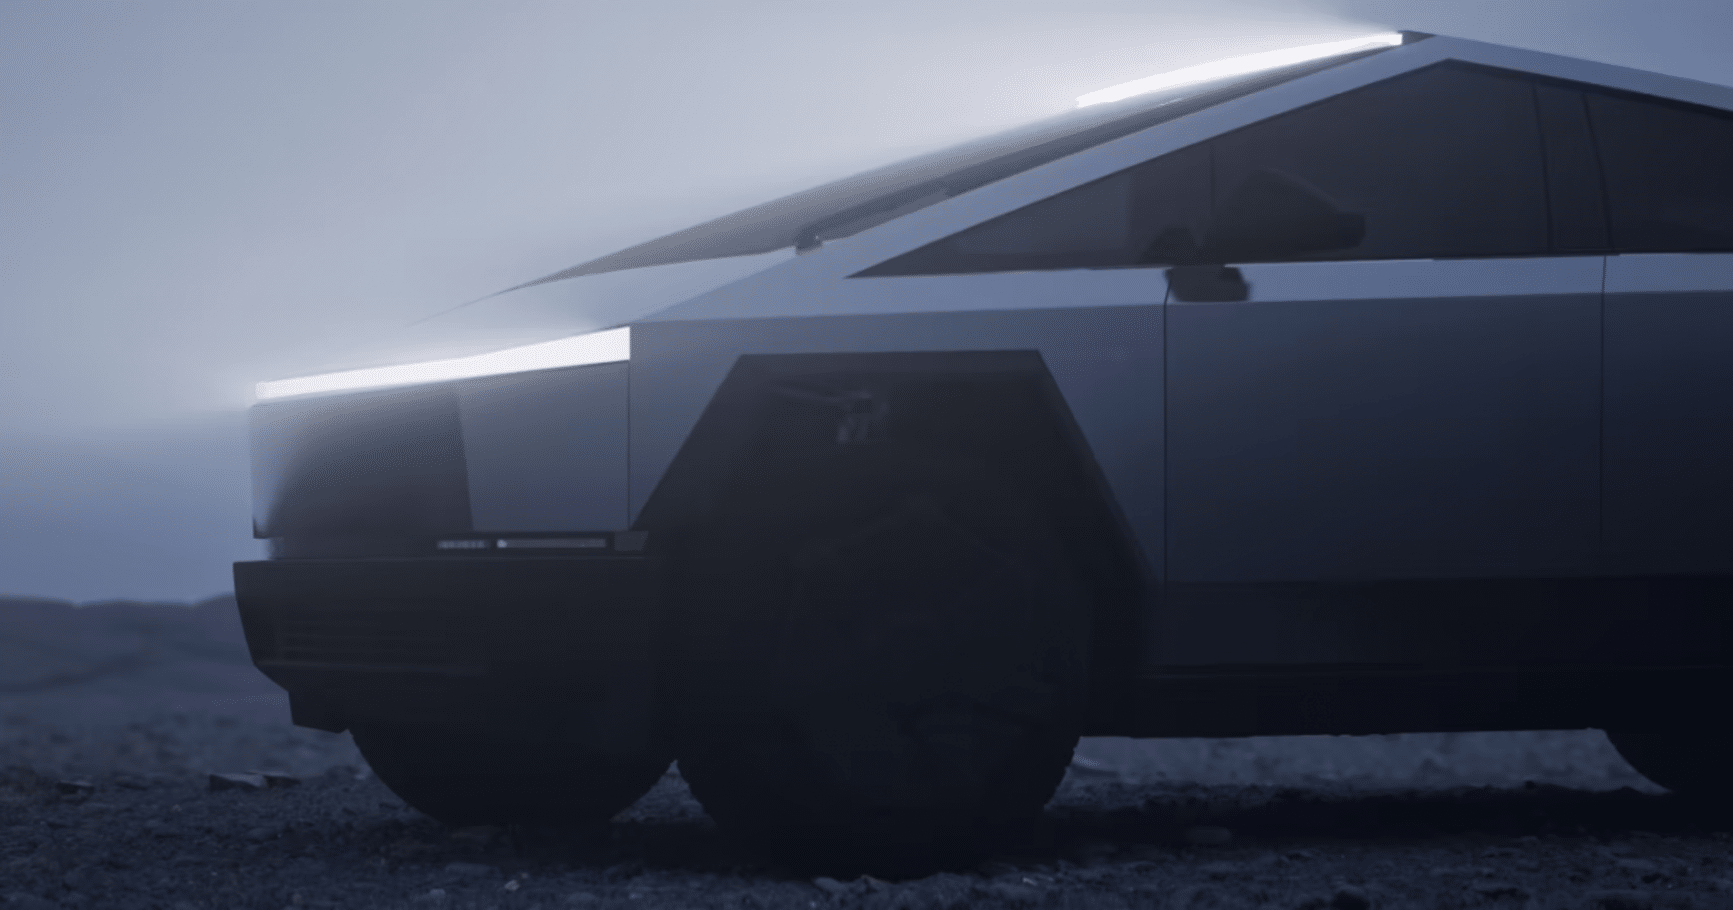 Tesla Cybertruck Equipped with Aquatic Abilities: Can it Really Be Used as a Boat?